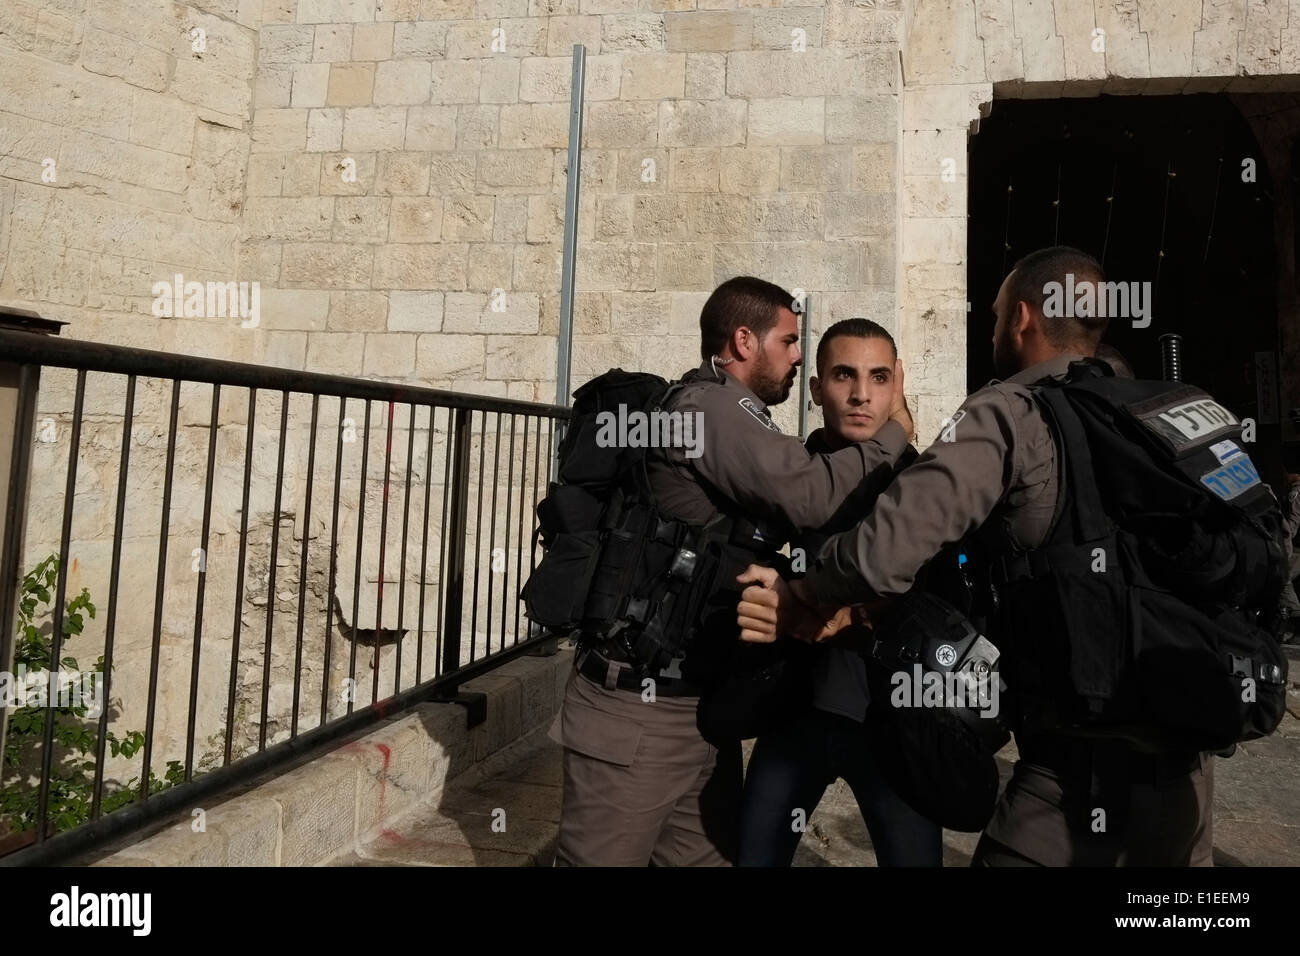 Israeli border police detain a Palestinian young man in Damascus gate old city Jerusalem Israel Stock Photo